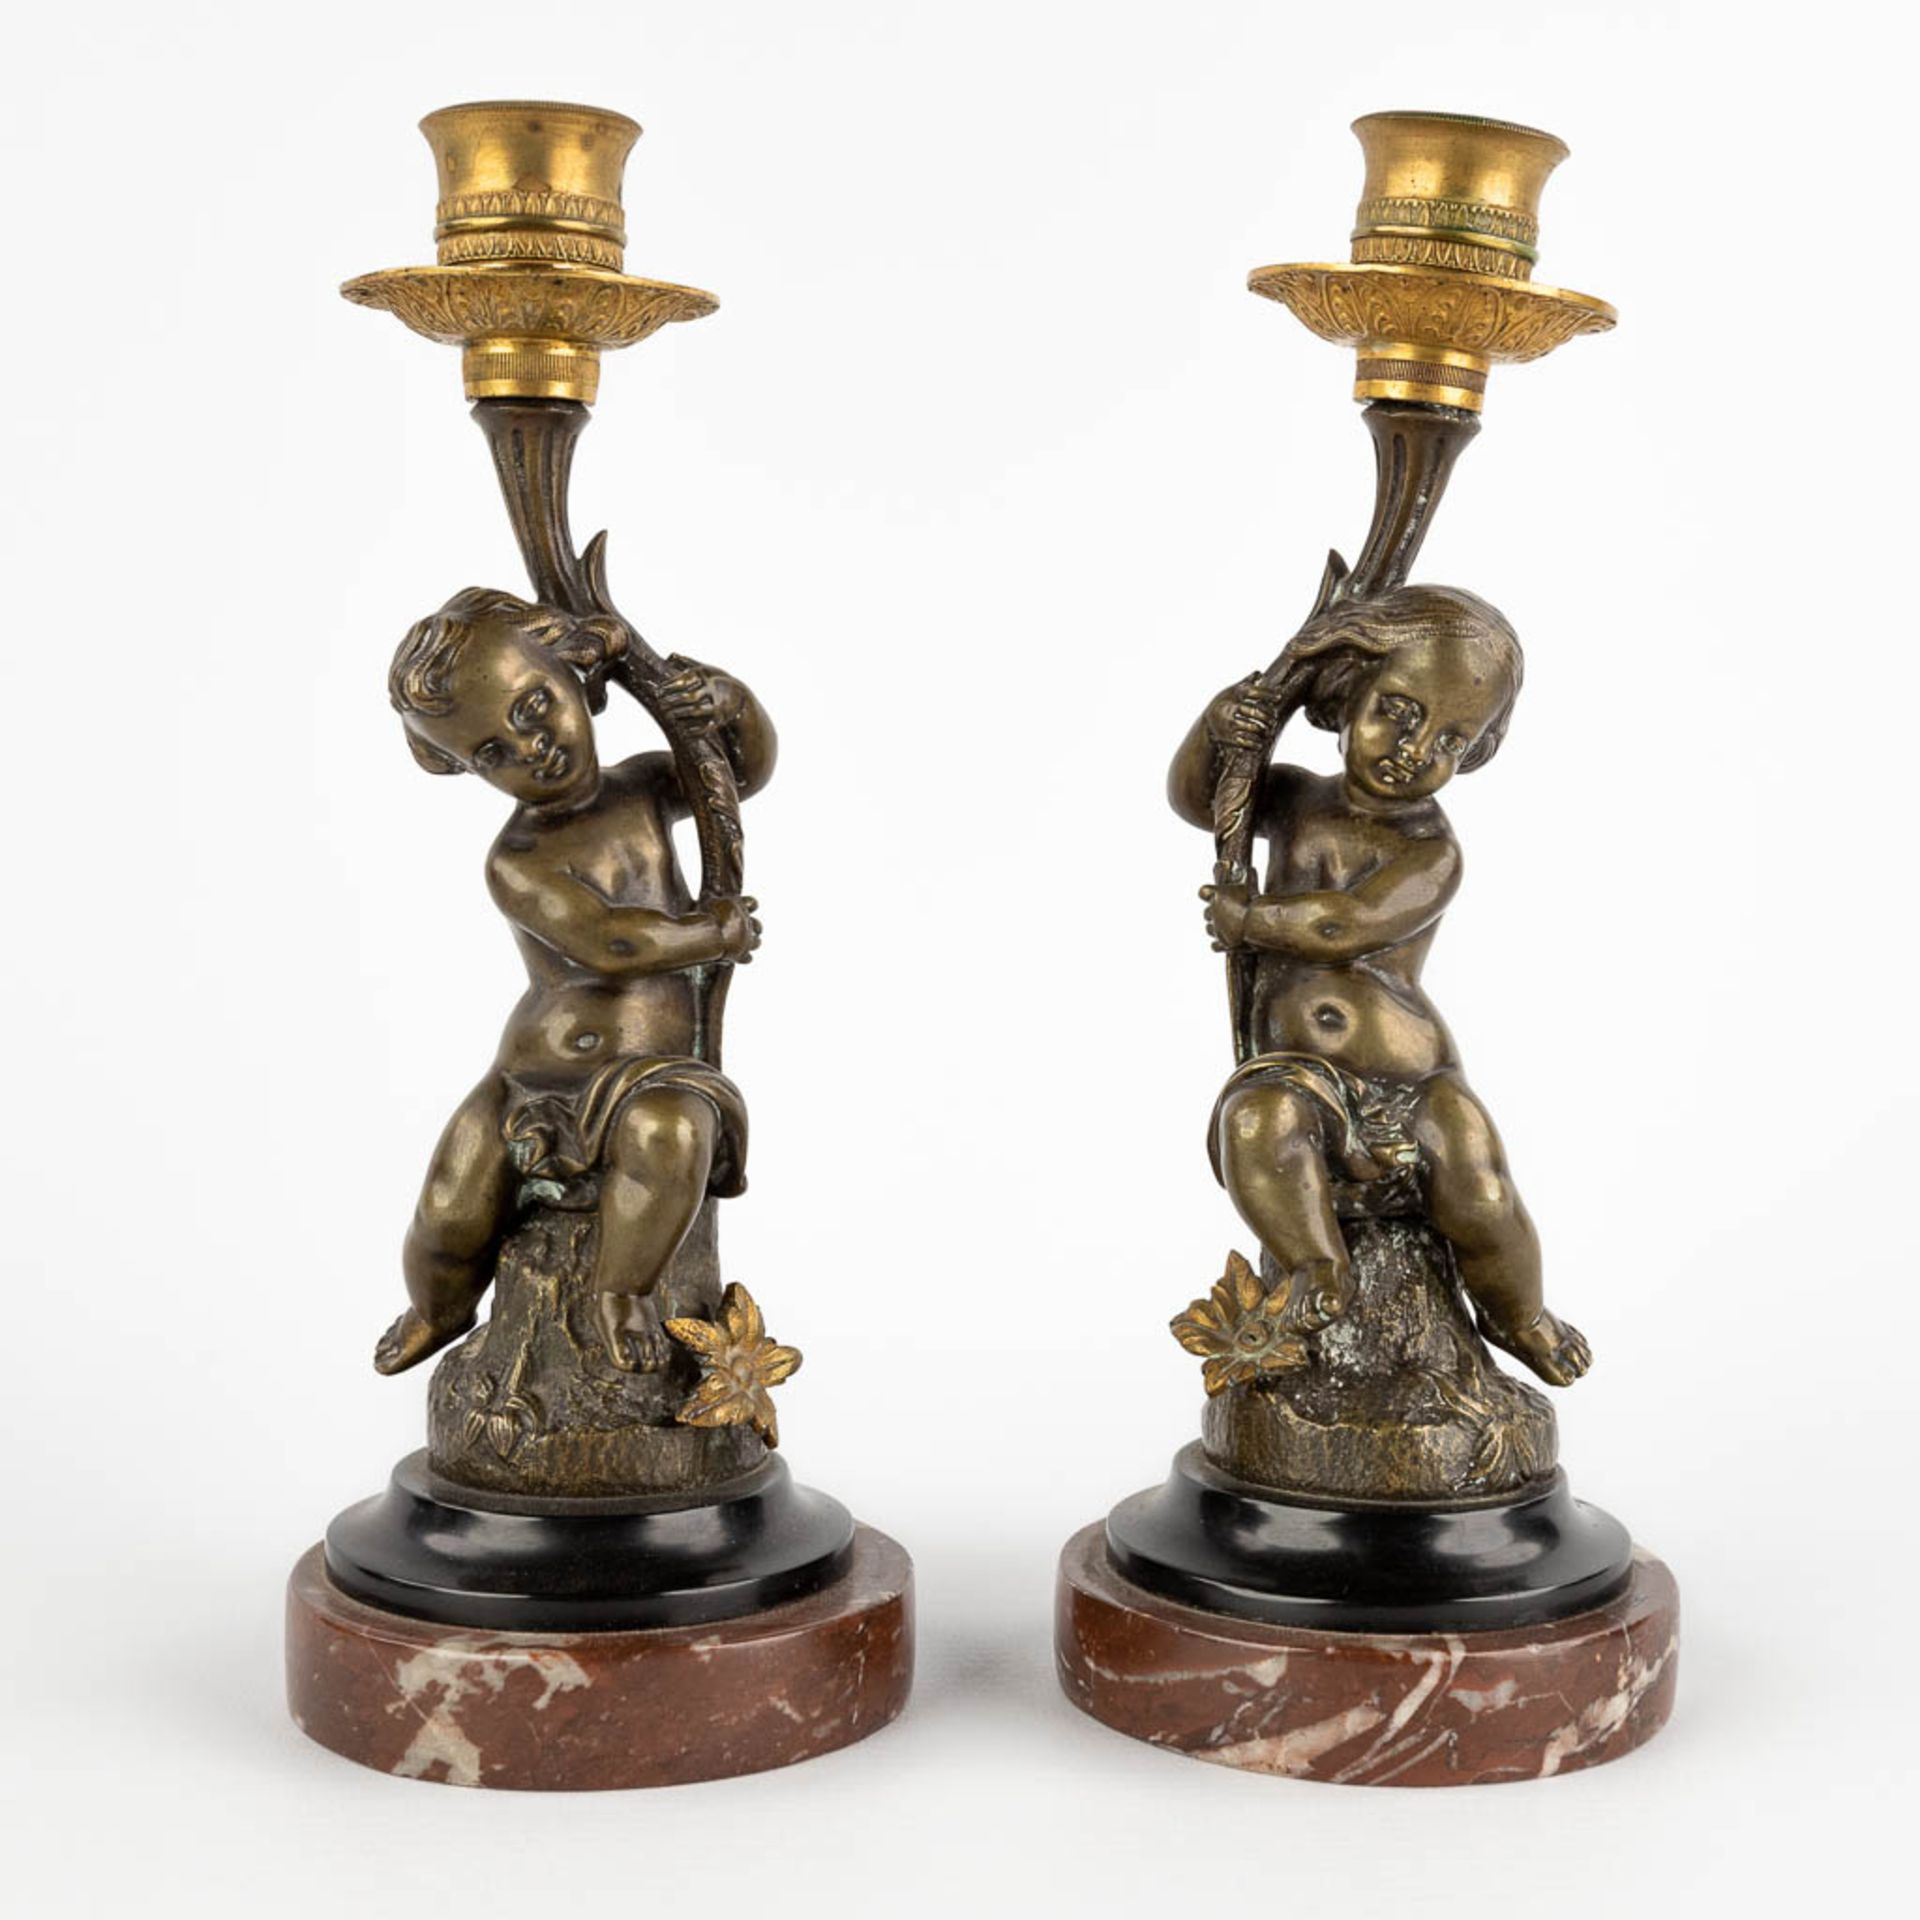 A pair of candlesticks with putti, patinated and gilt bronze. 19th C. (H:23 x D:9 cm)